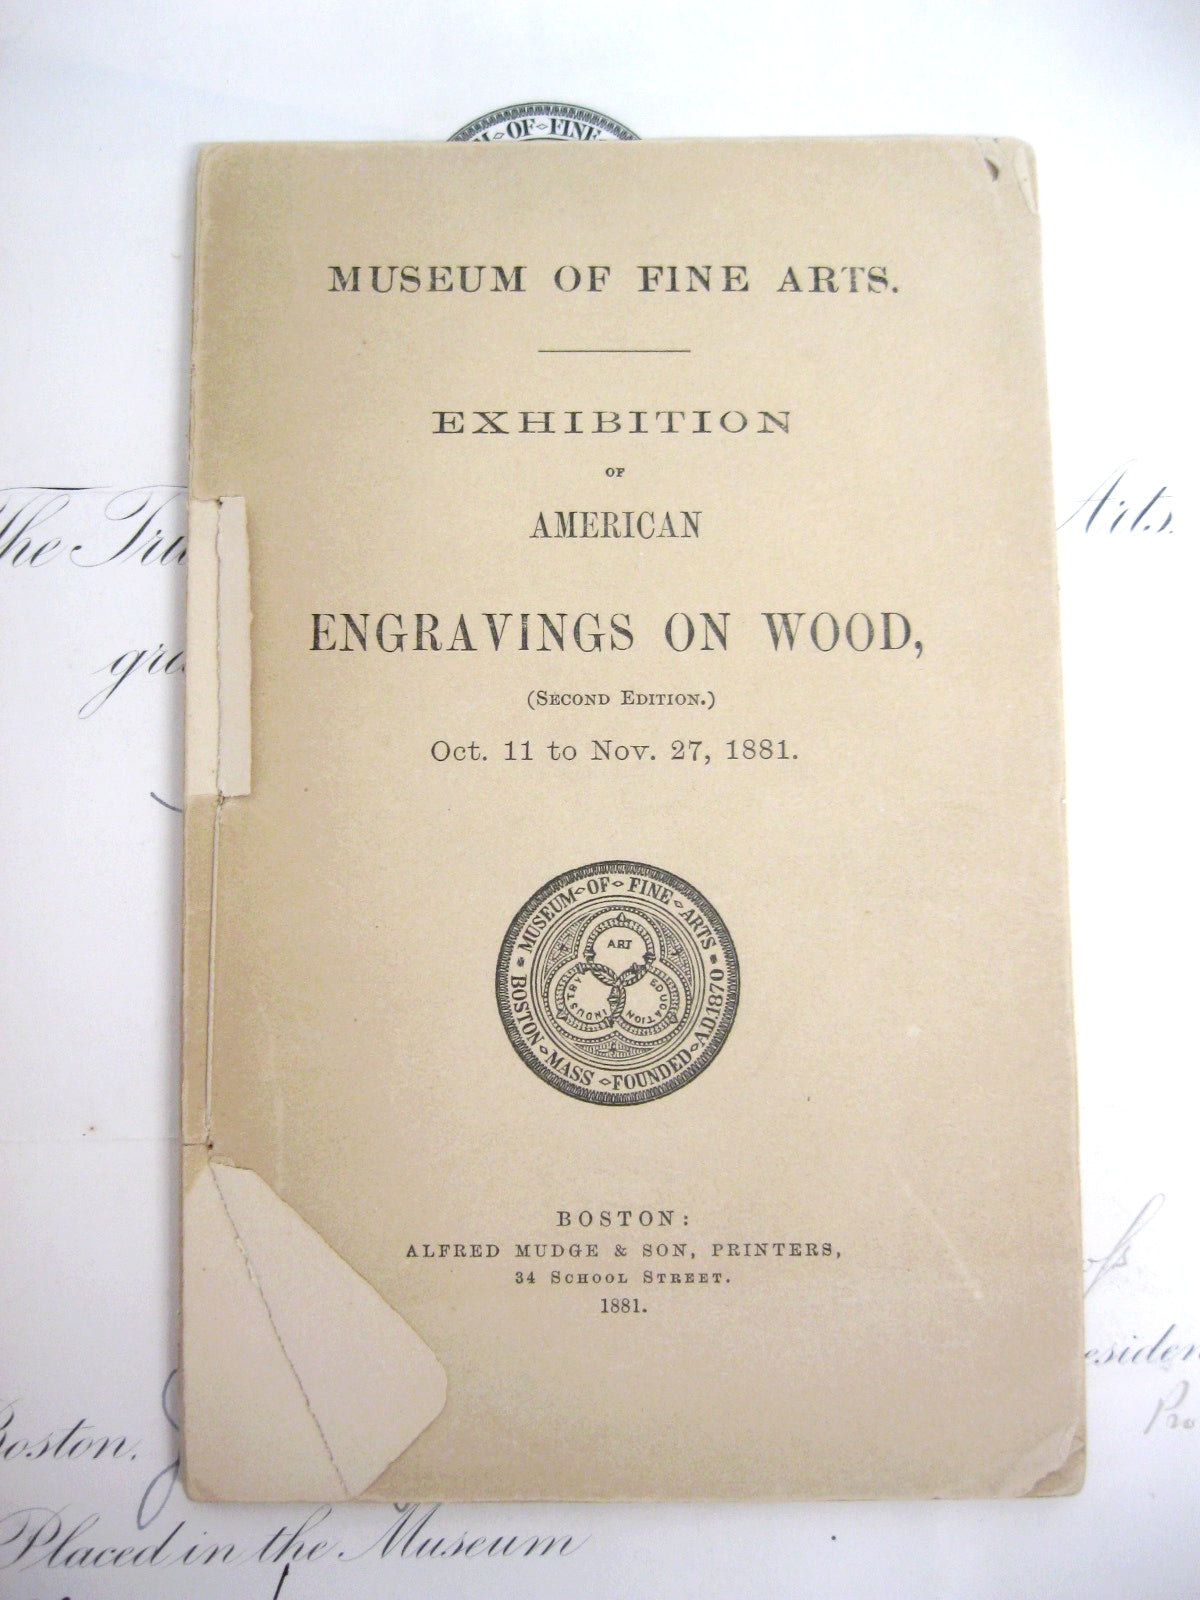 History of Wood-Engraving in America by W.J. Linton